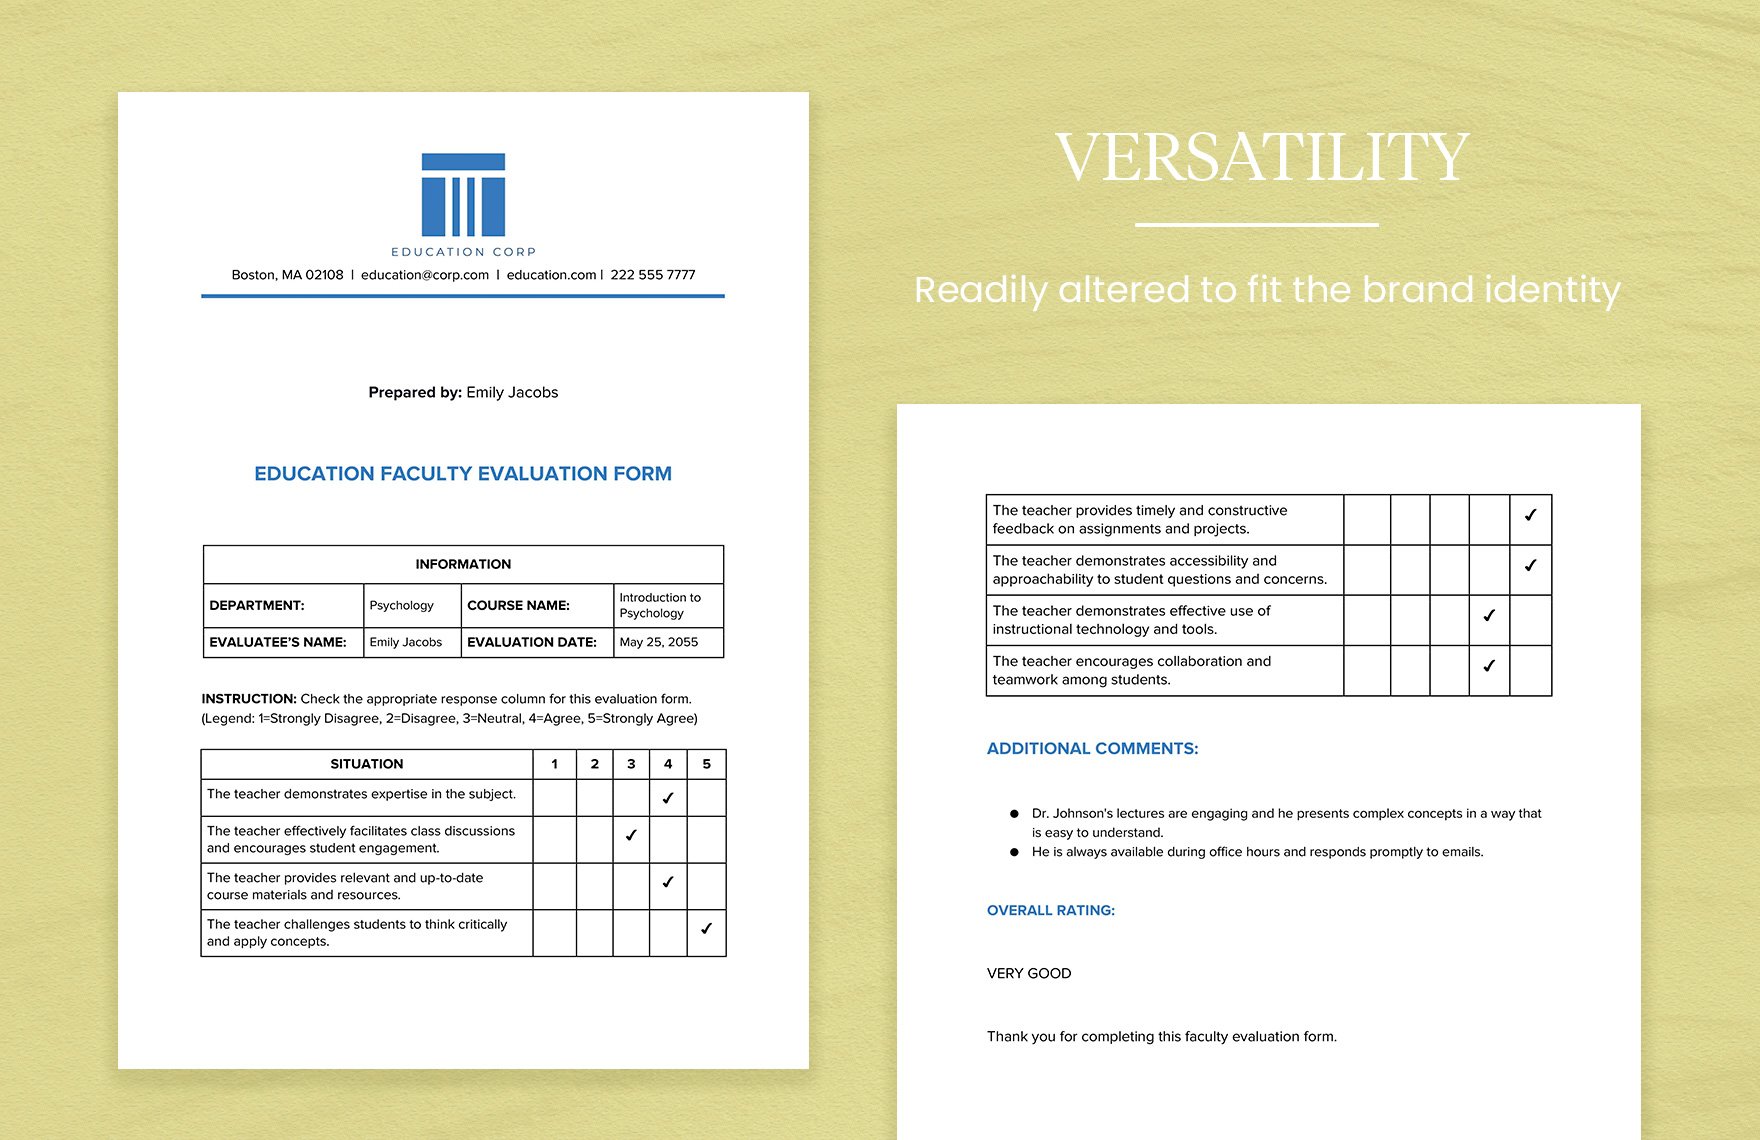 Education Faculty Evaluation Form